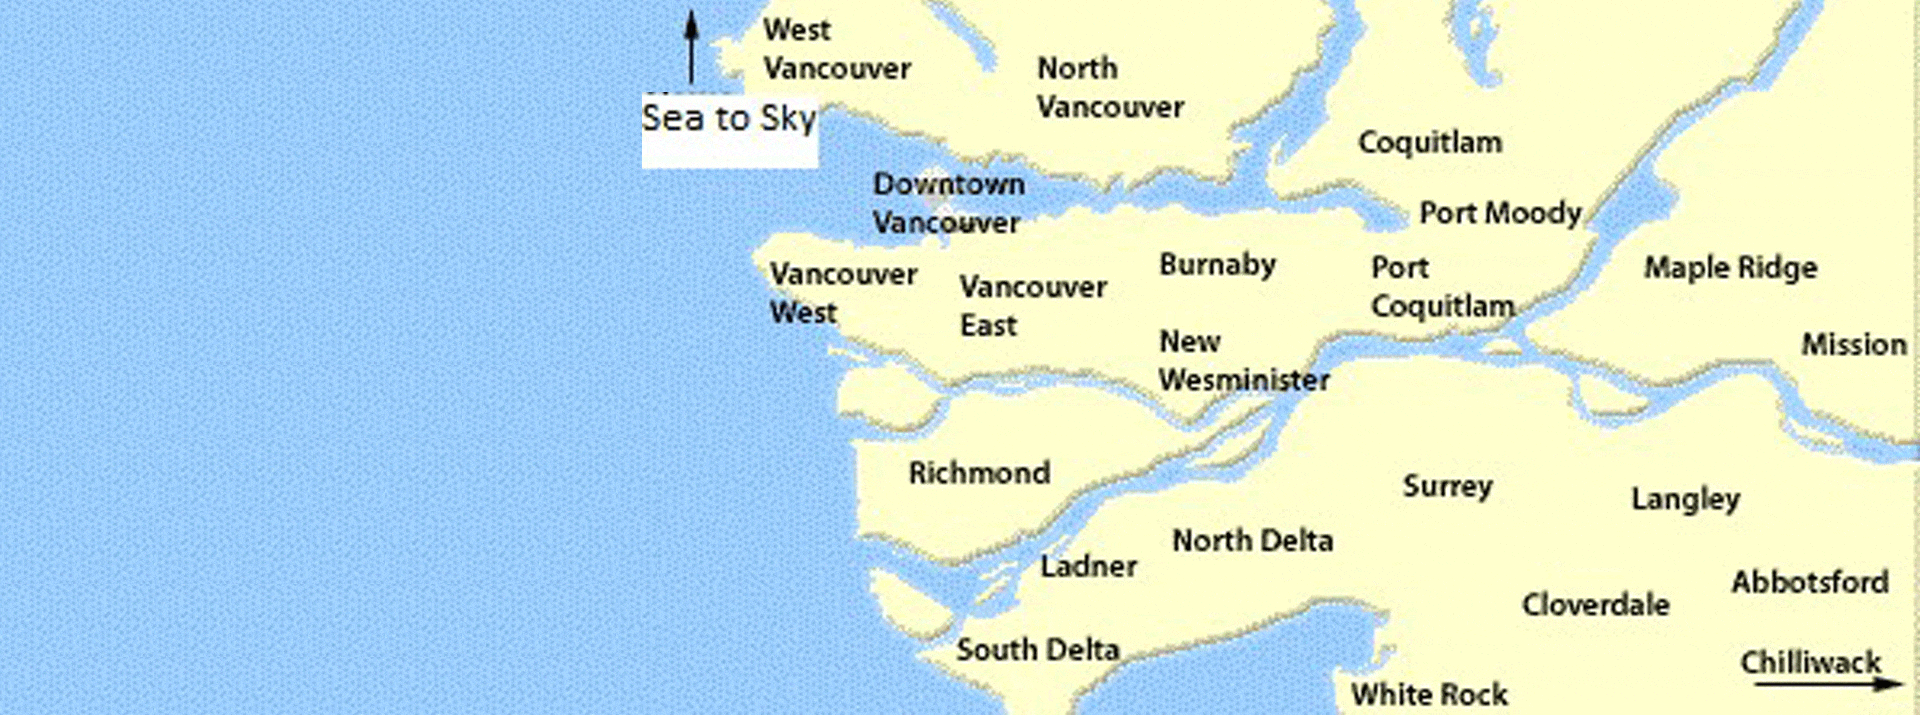 Serving Metro Vancouver, Fraser Valley, Sea to Sky Corridor, and beyond.